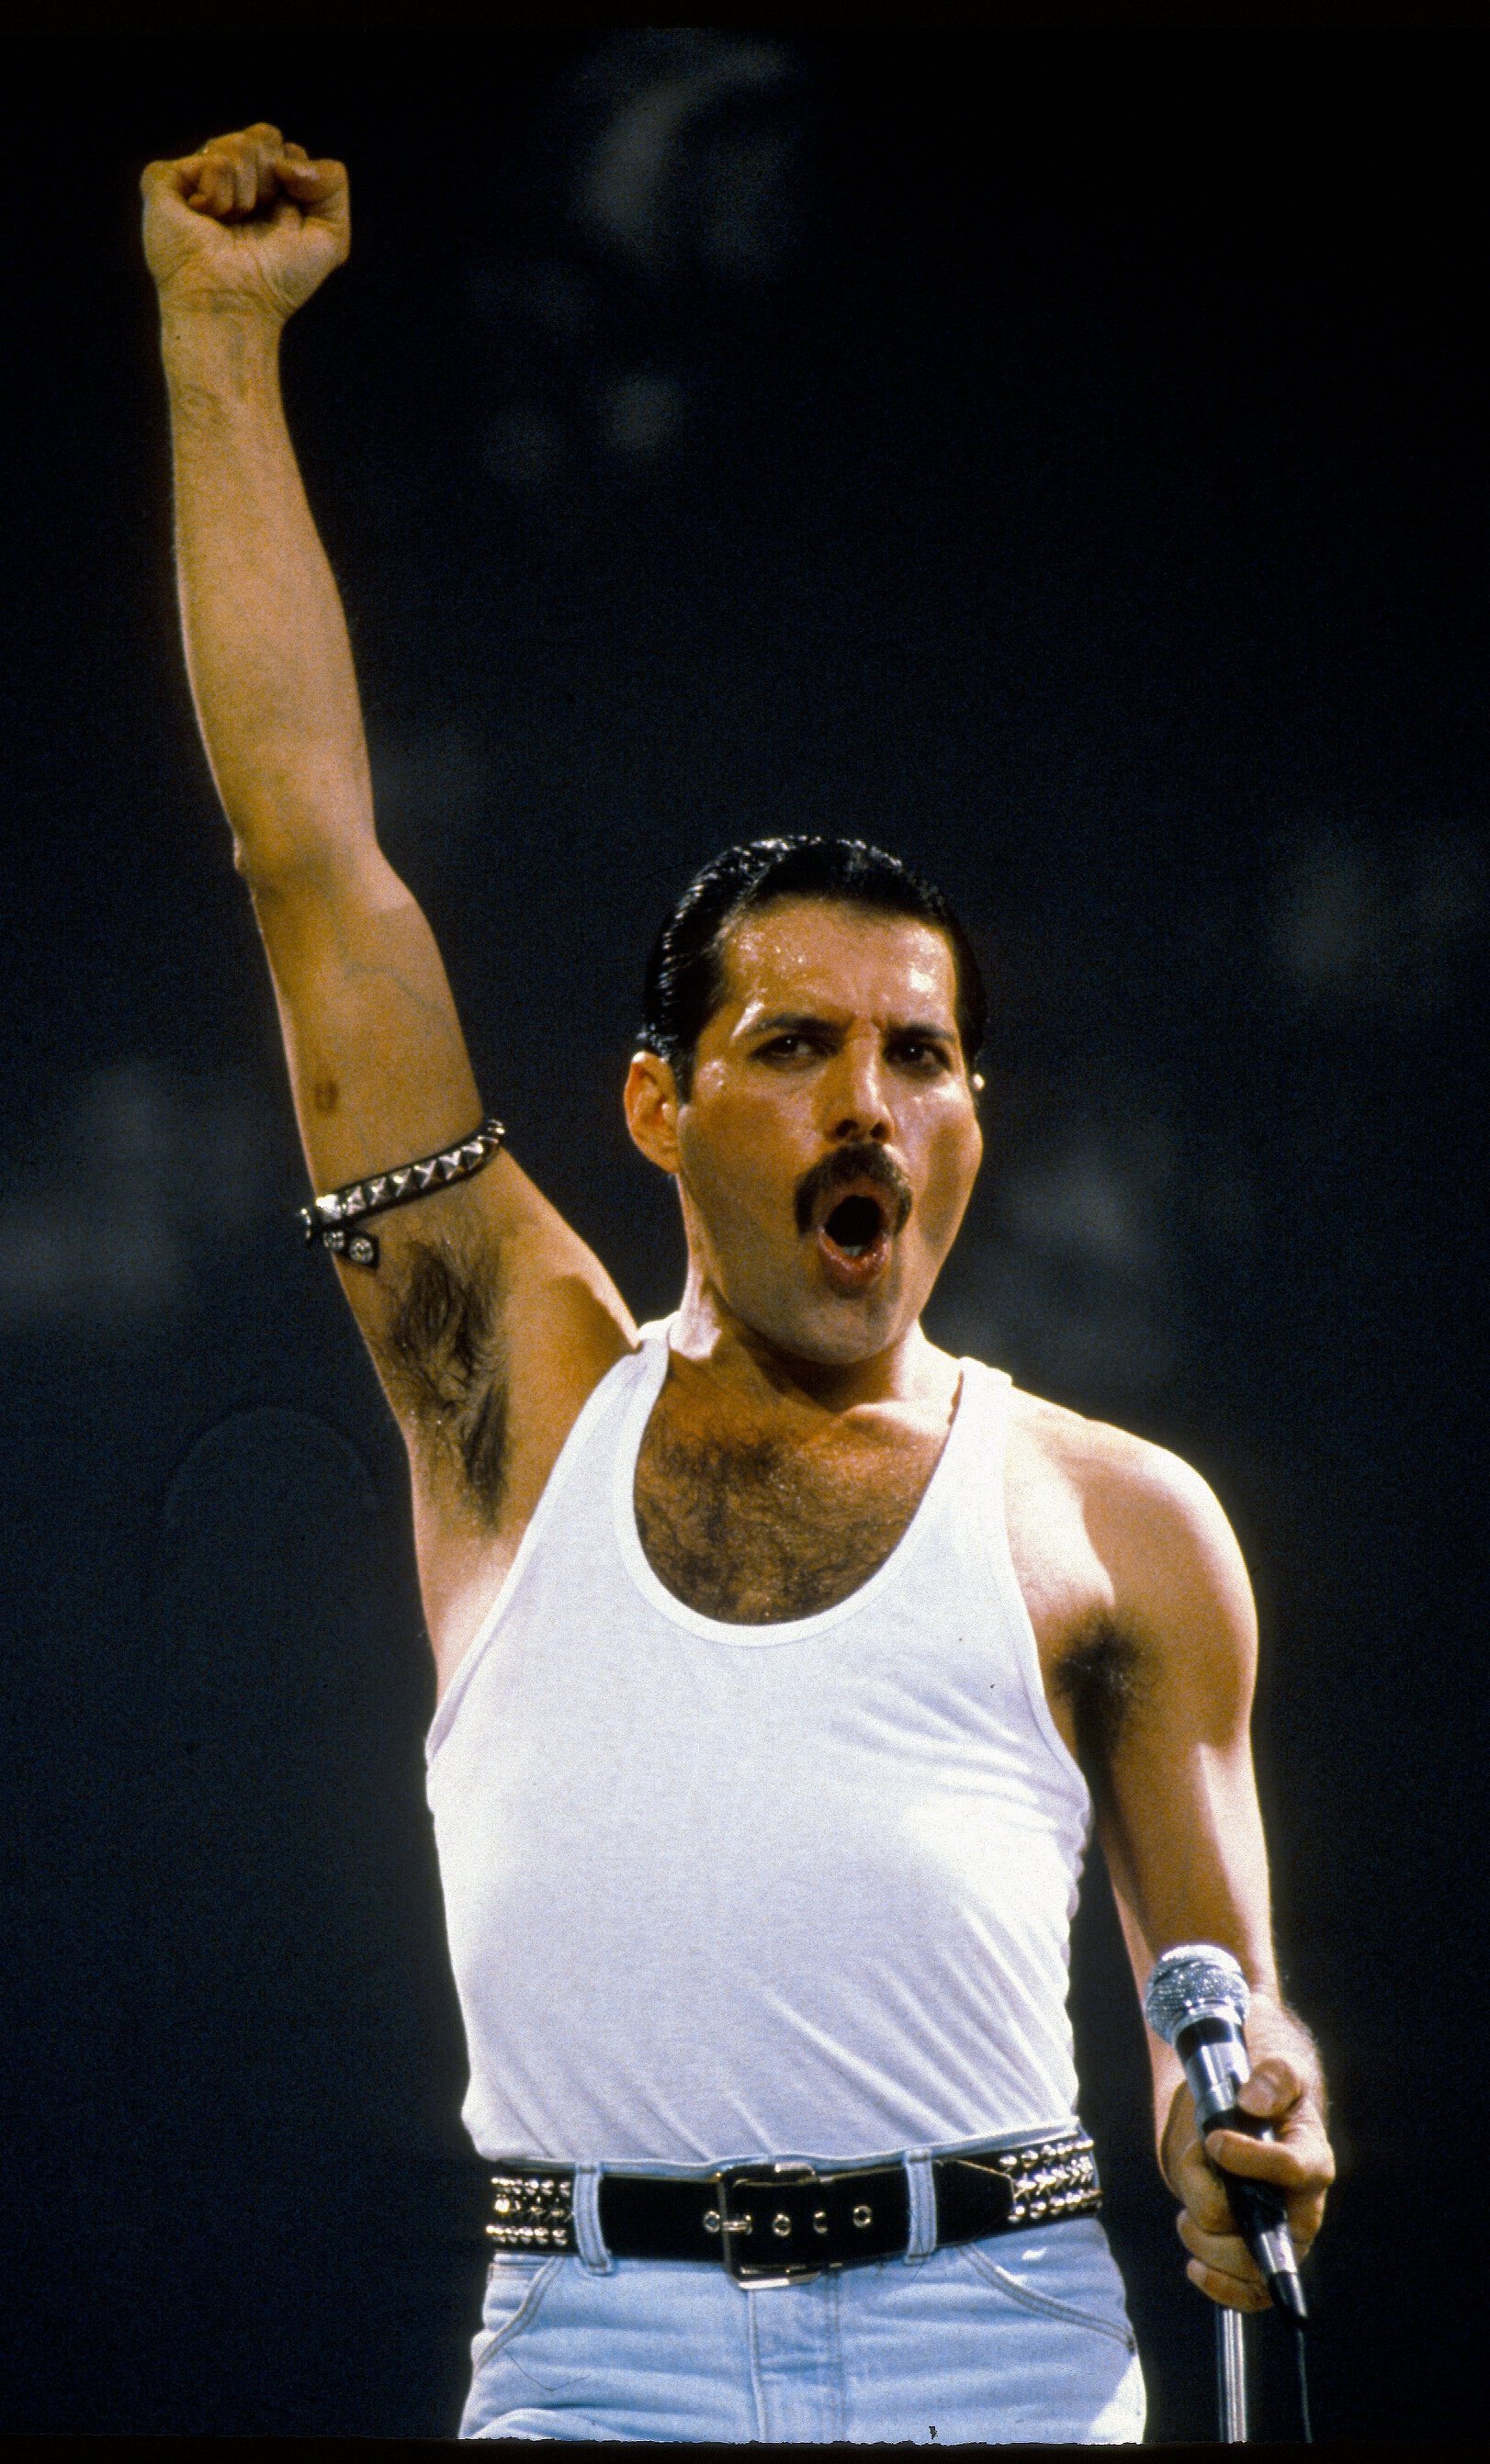 Freddie Mercury at the Live Aid concert on July 13, 1985 in London, England | Source: Getty Images